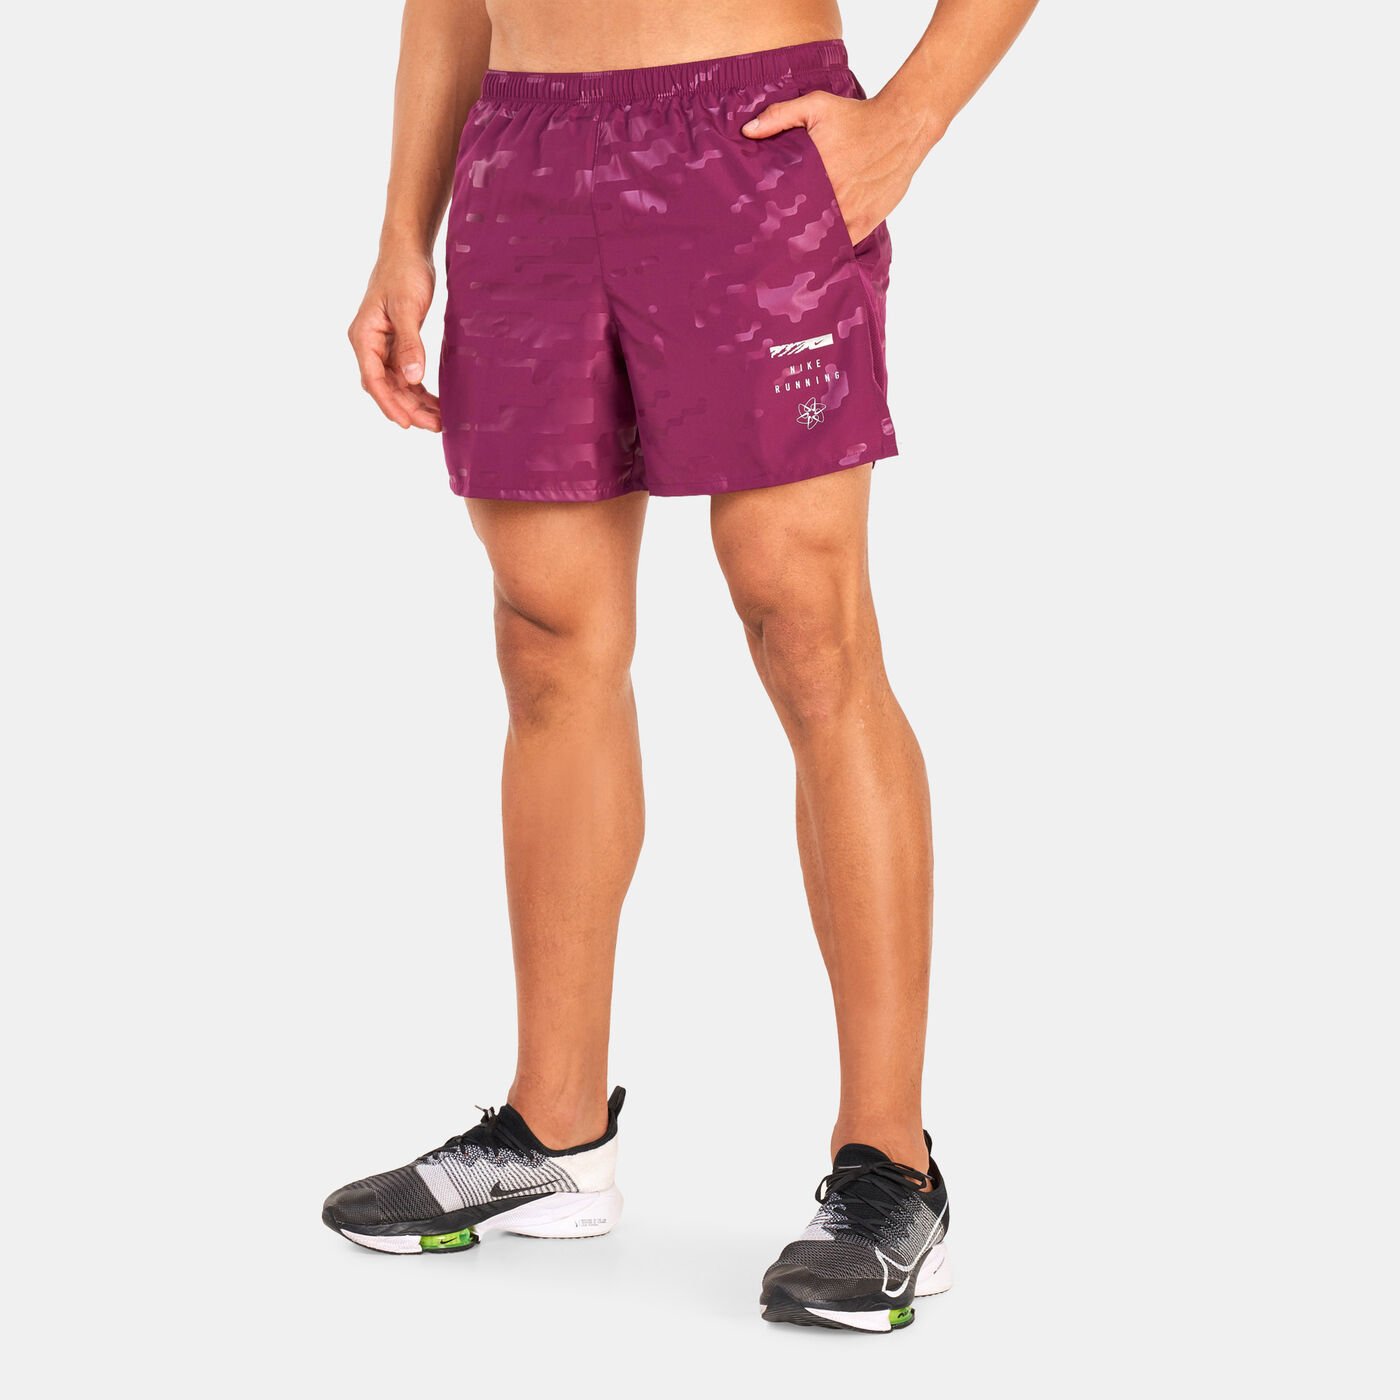 Men's Dri-FIT Run Division Challenger Brief-Lined Running Shorts